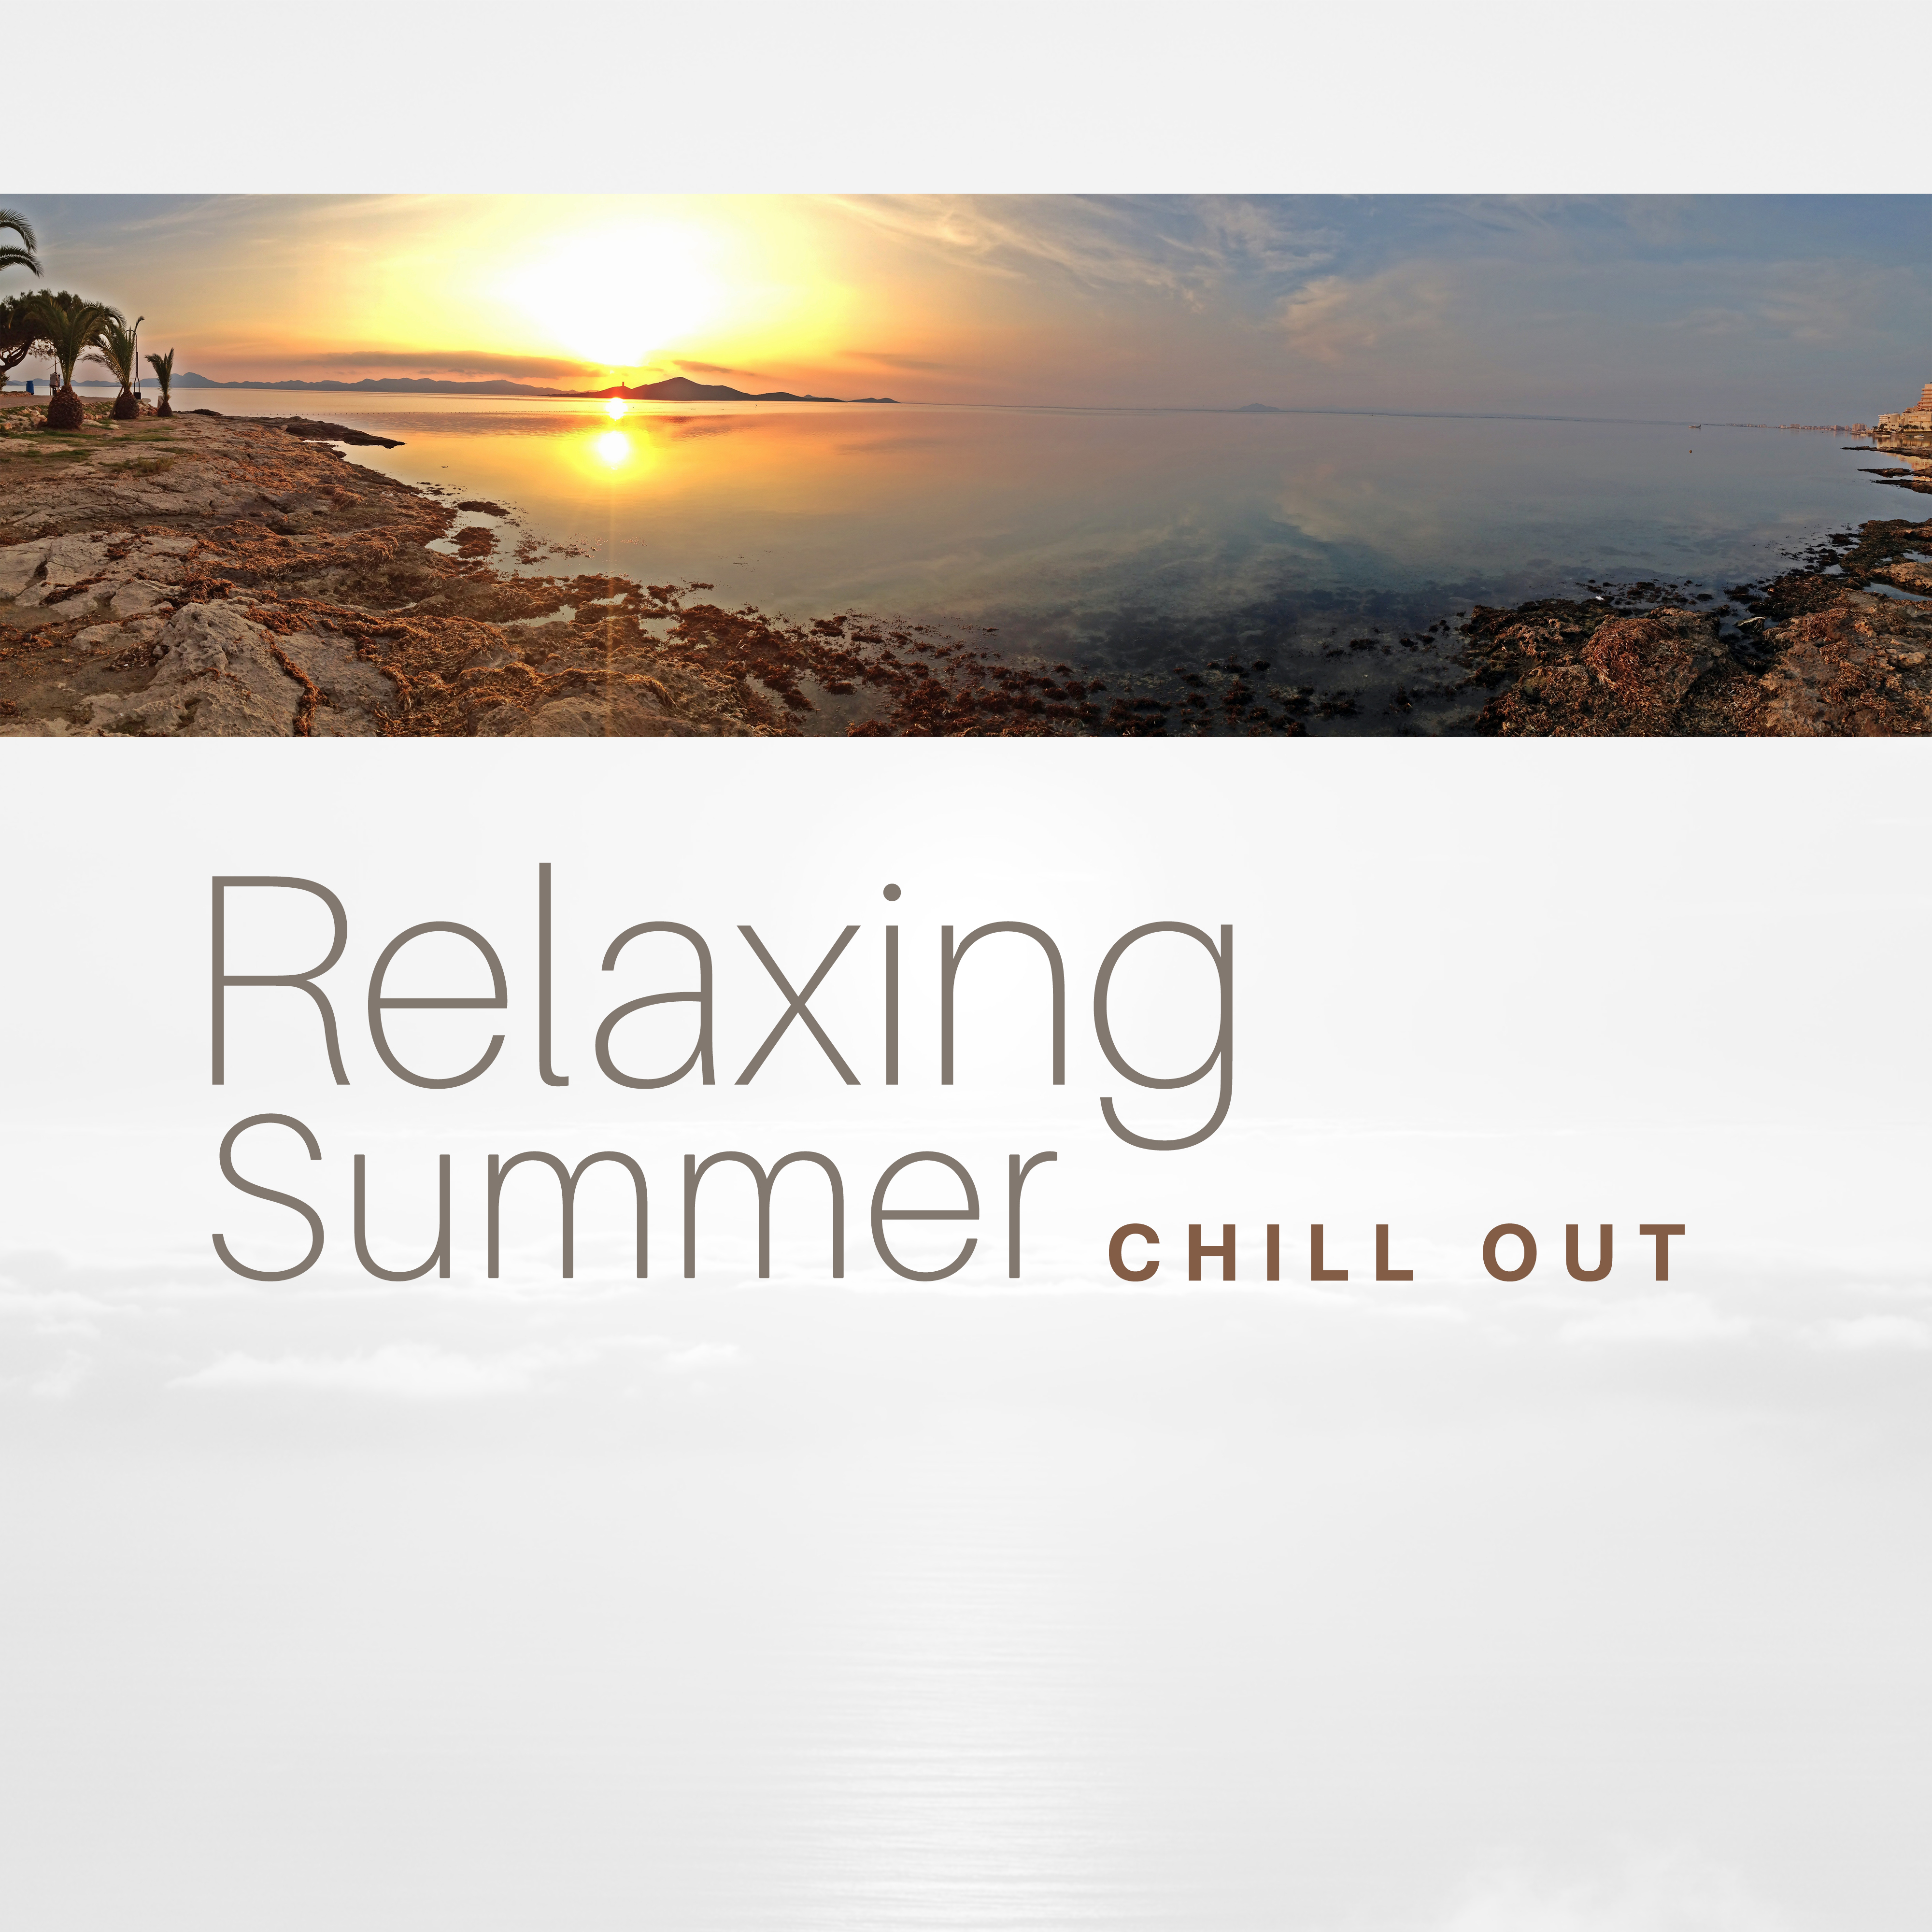 Relaxing Summer Chill Out – Holiday Relaxation, Ibiza Summer, Rest on the Beach, Hot Weather